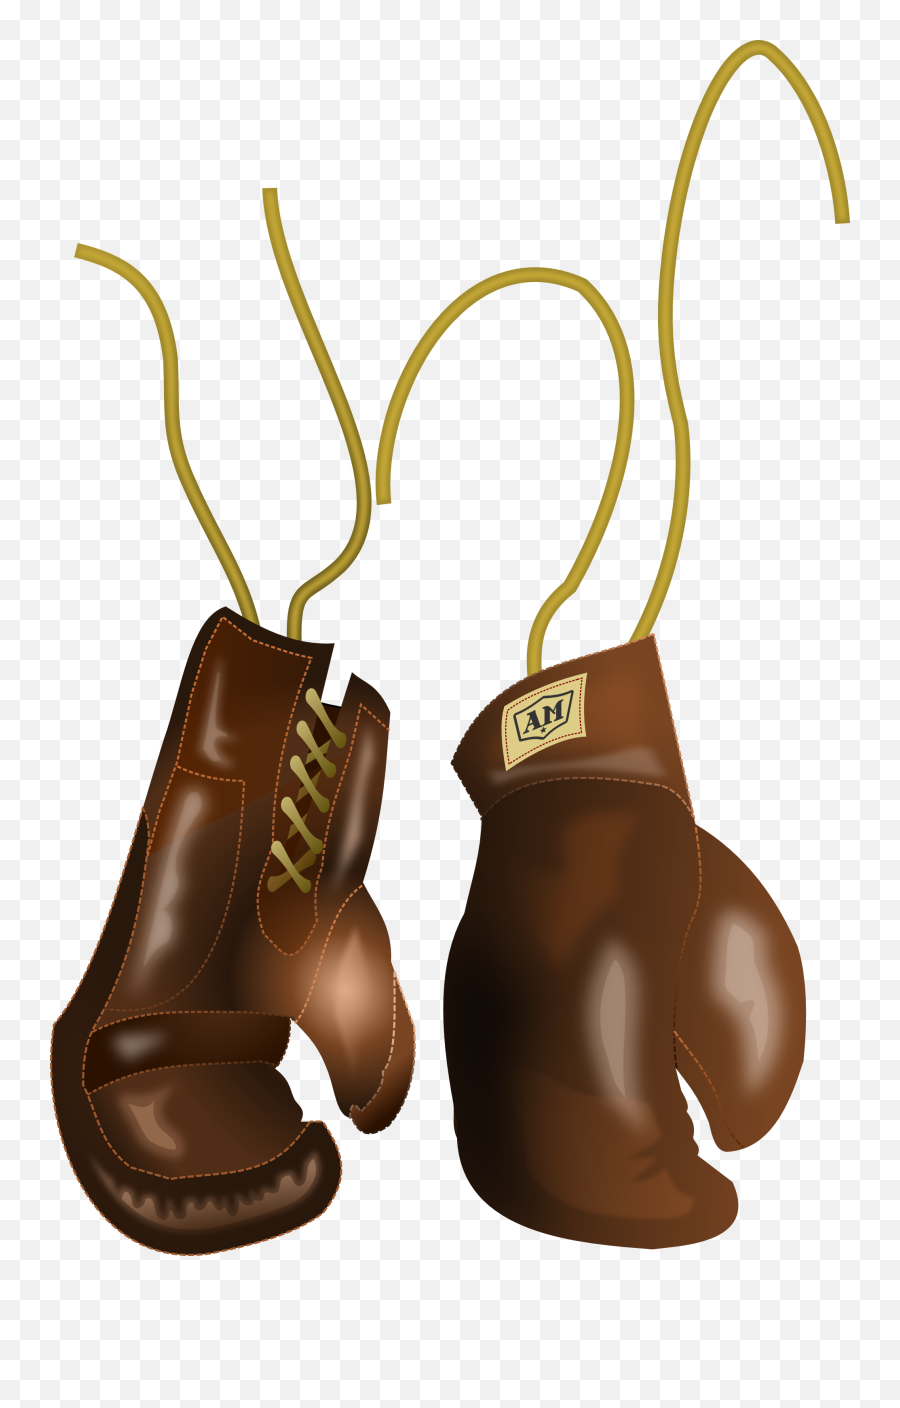 Floyd - Conor Mma Fight A Timeline Of The Potential Fight Old Boxing Glove Clipart Emoji,Timeline Clipart